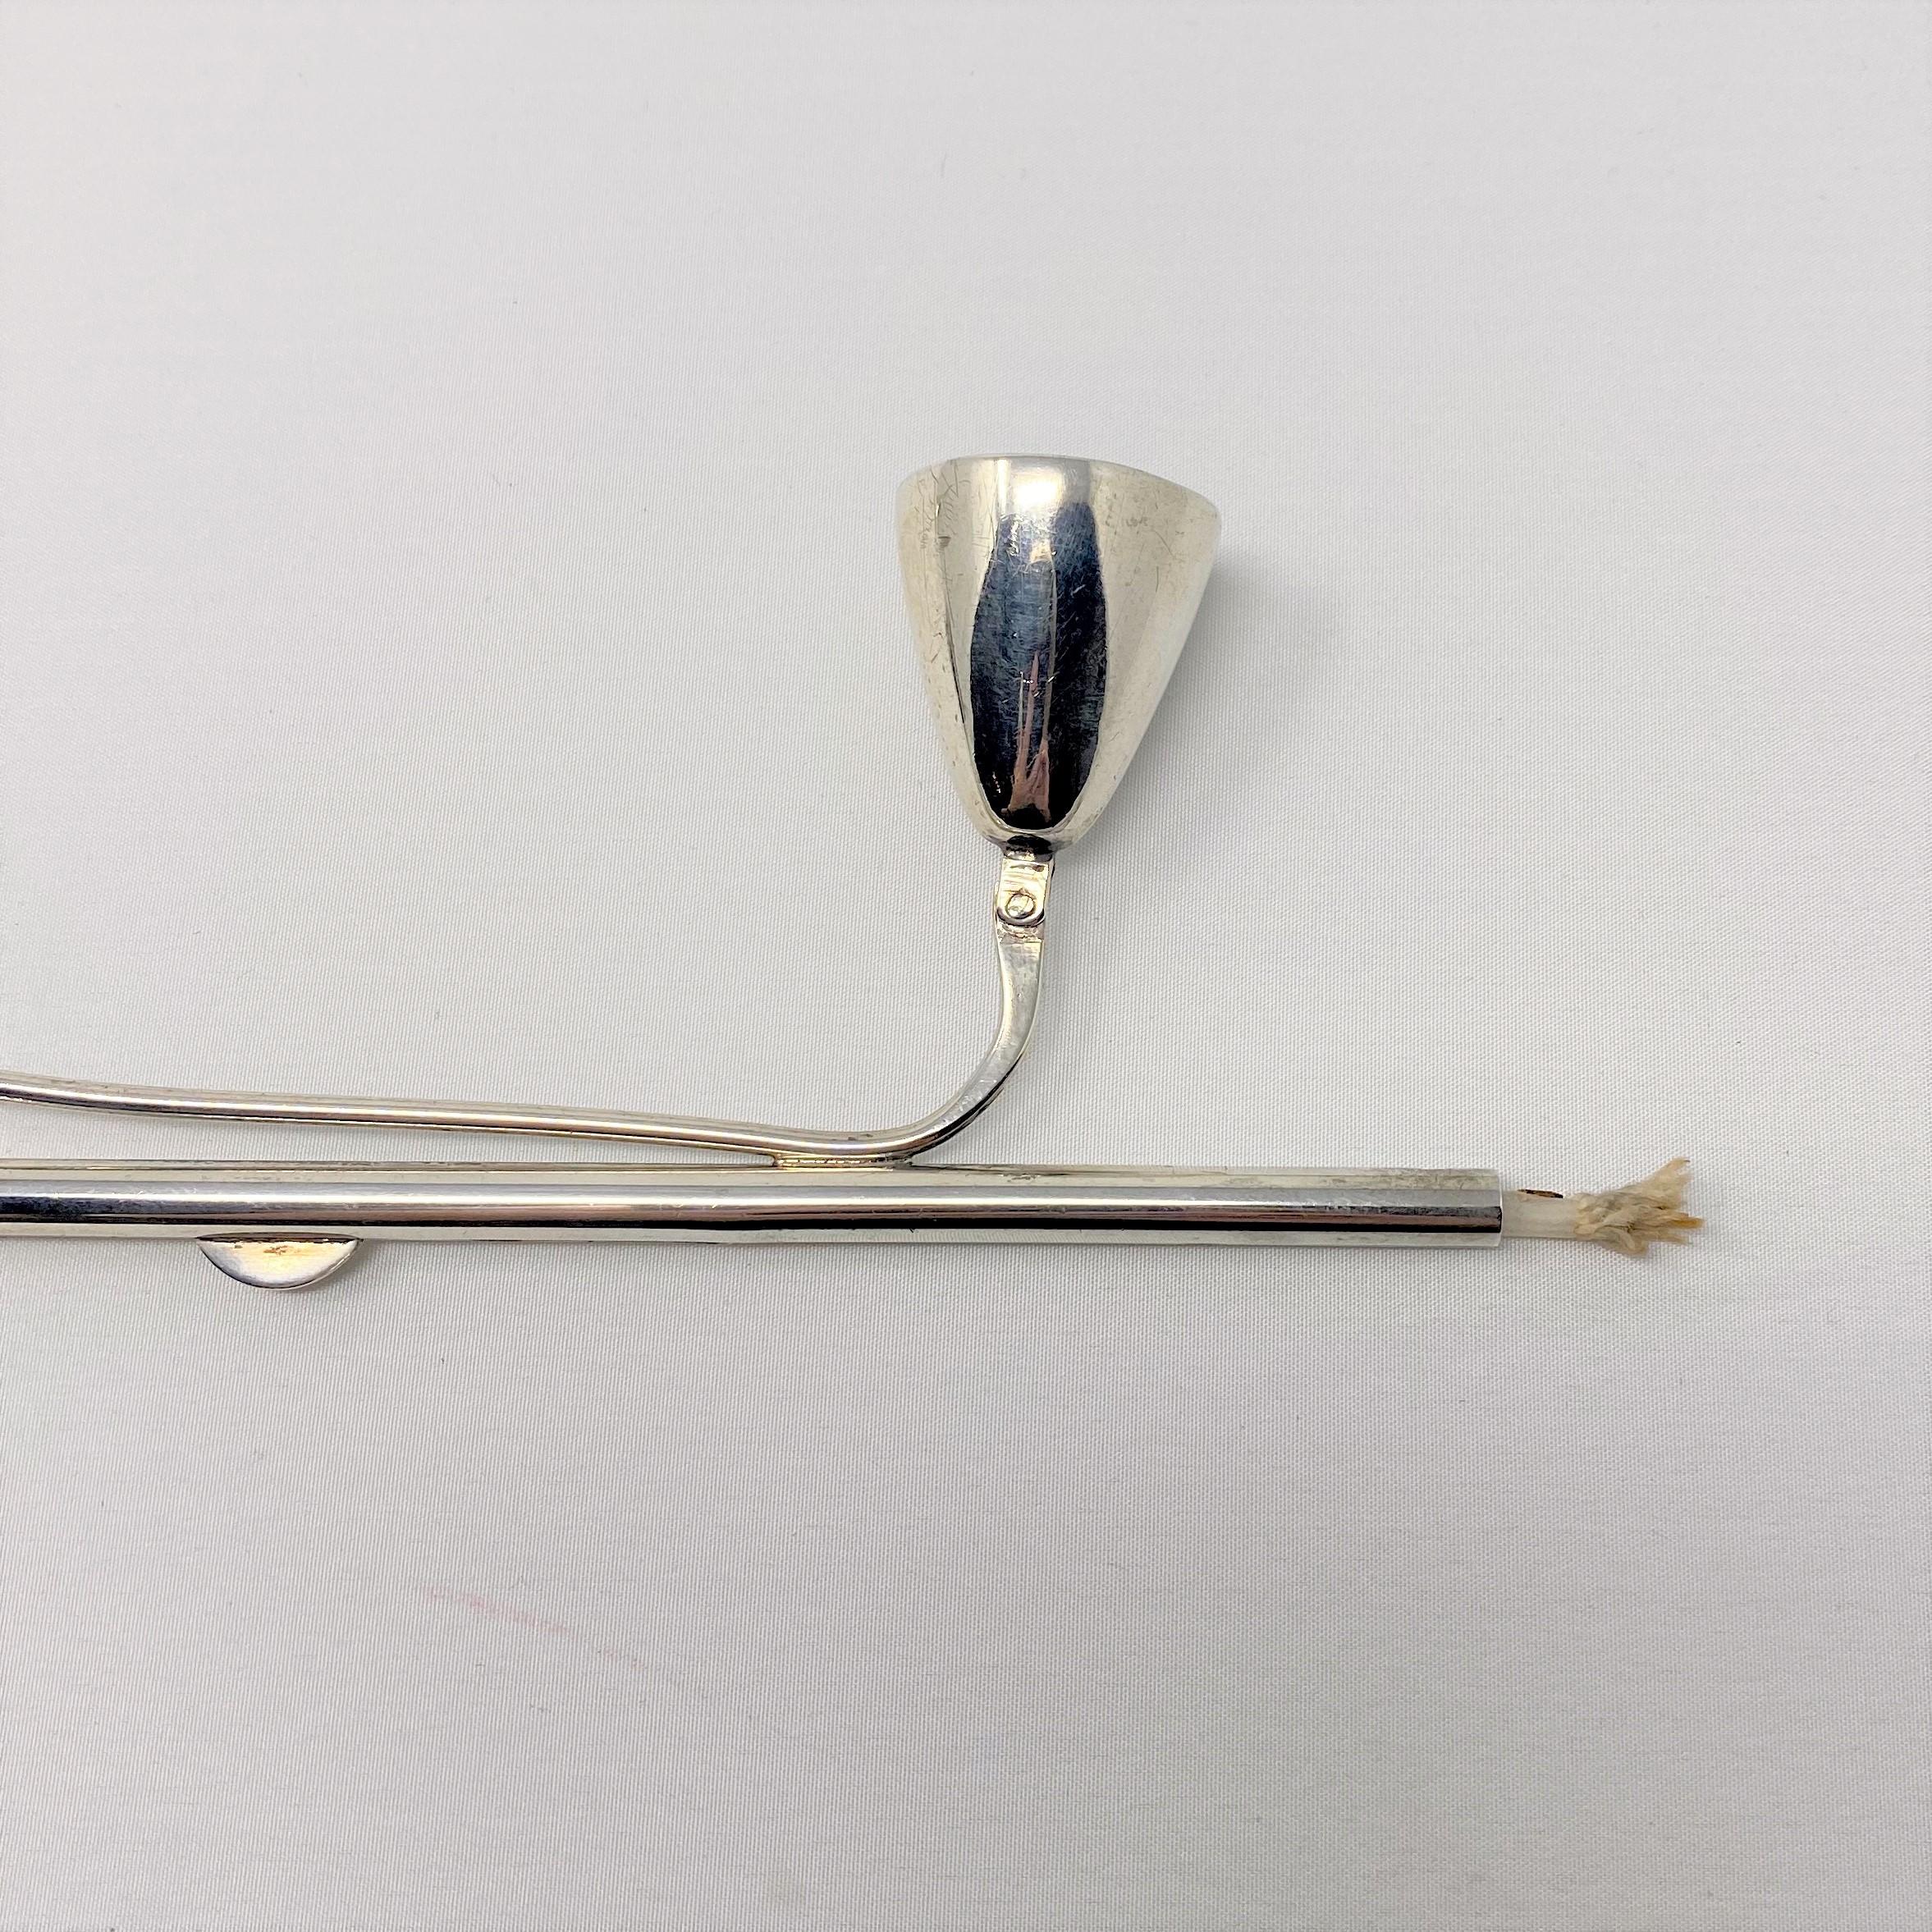 Antique American Silver Plate Candle Snuffer, Lighter & Match Holder, circa 1910 1